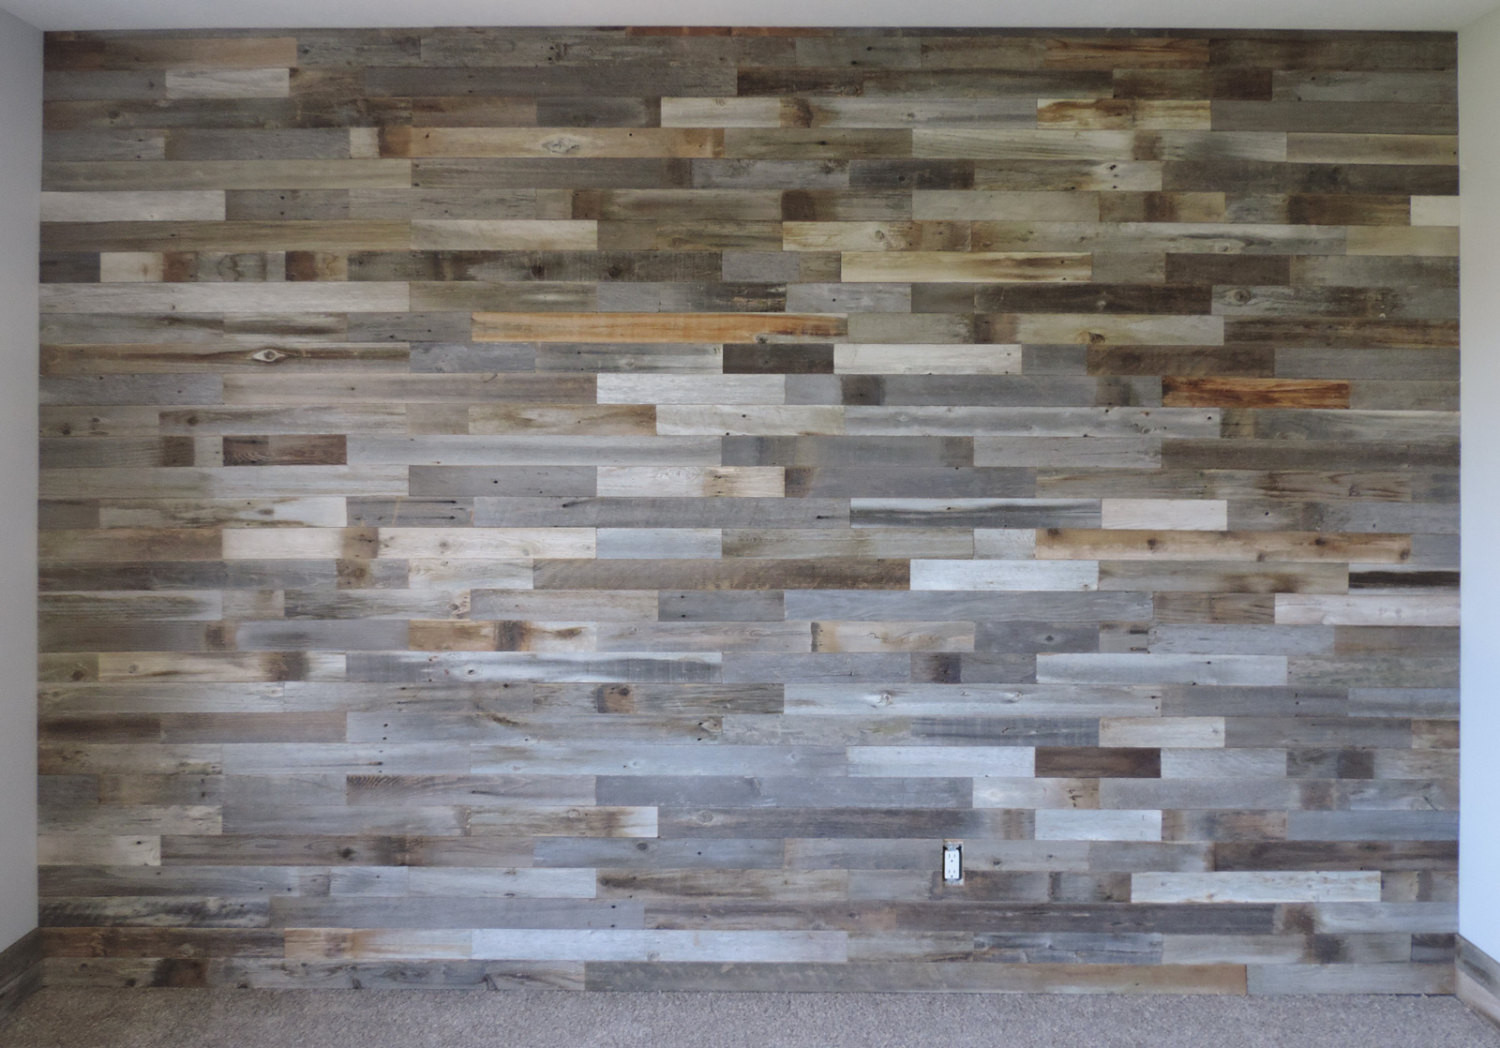 DIY Wood Panel Wall
 Reclaimed Wood Wall Paneling DIY asst 3 inch boards by